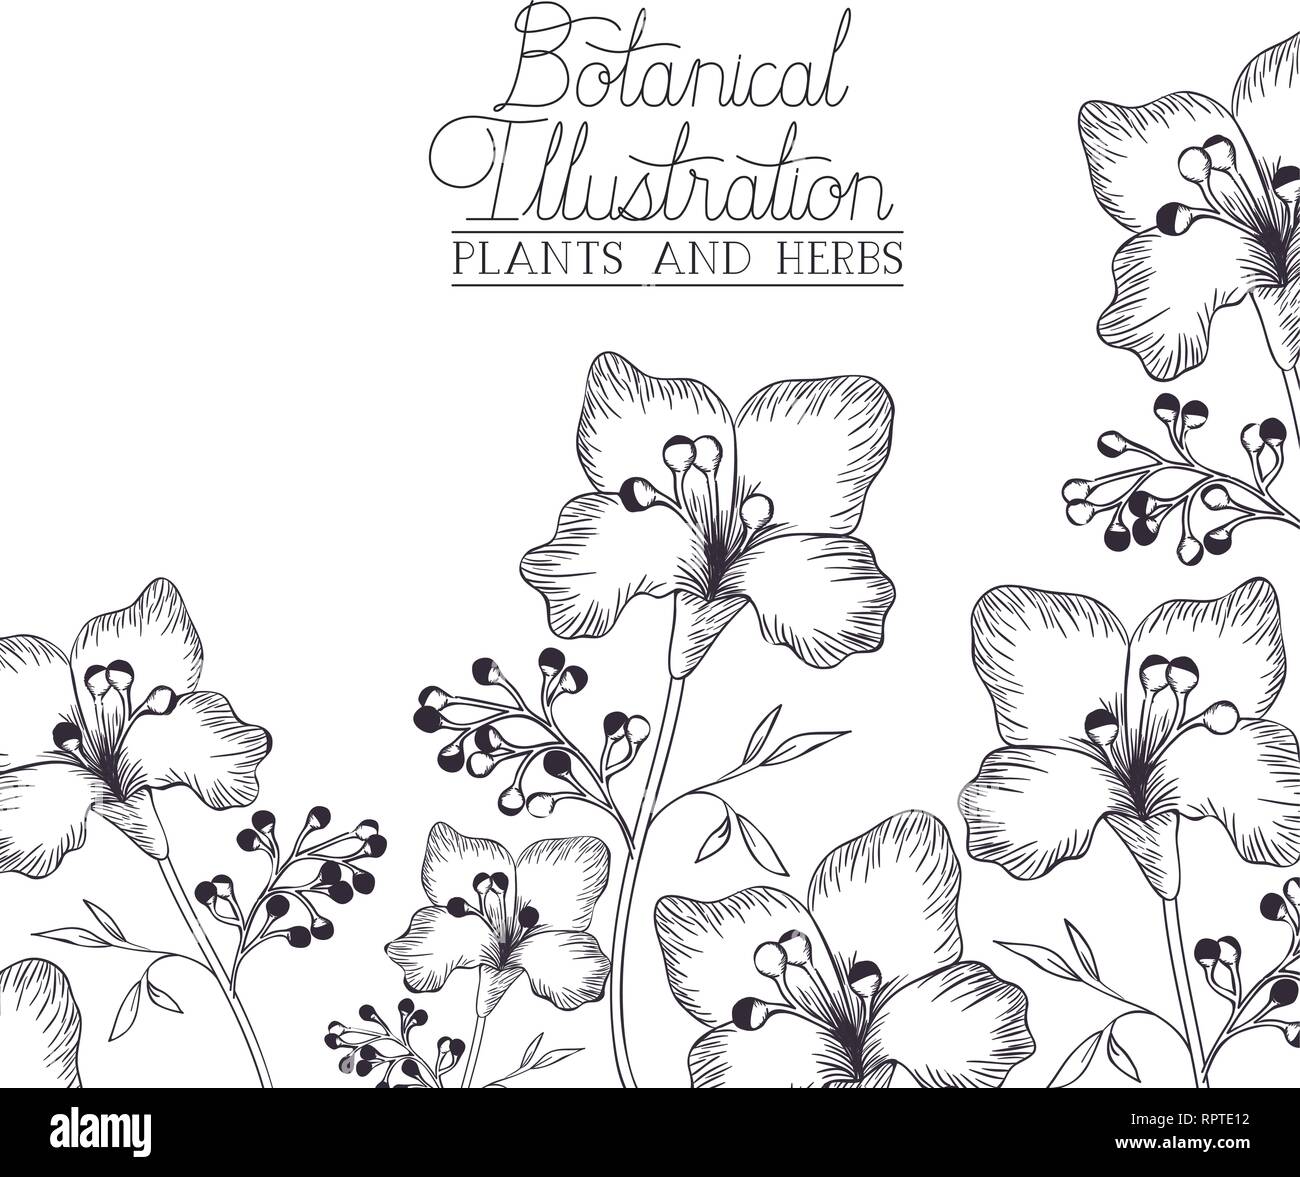 botanical illustration label with plants and herbs Stock Vector